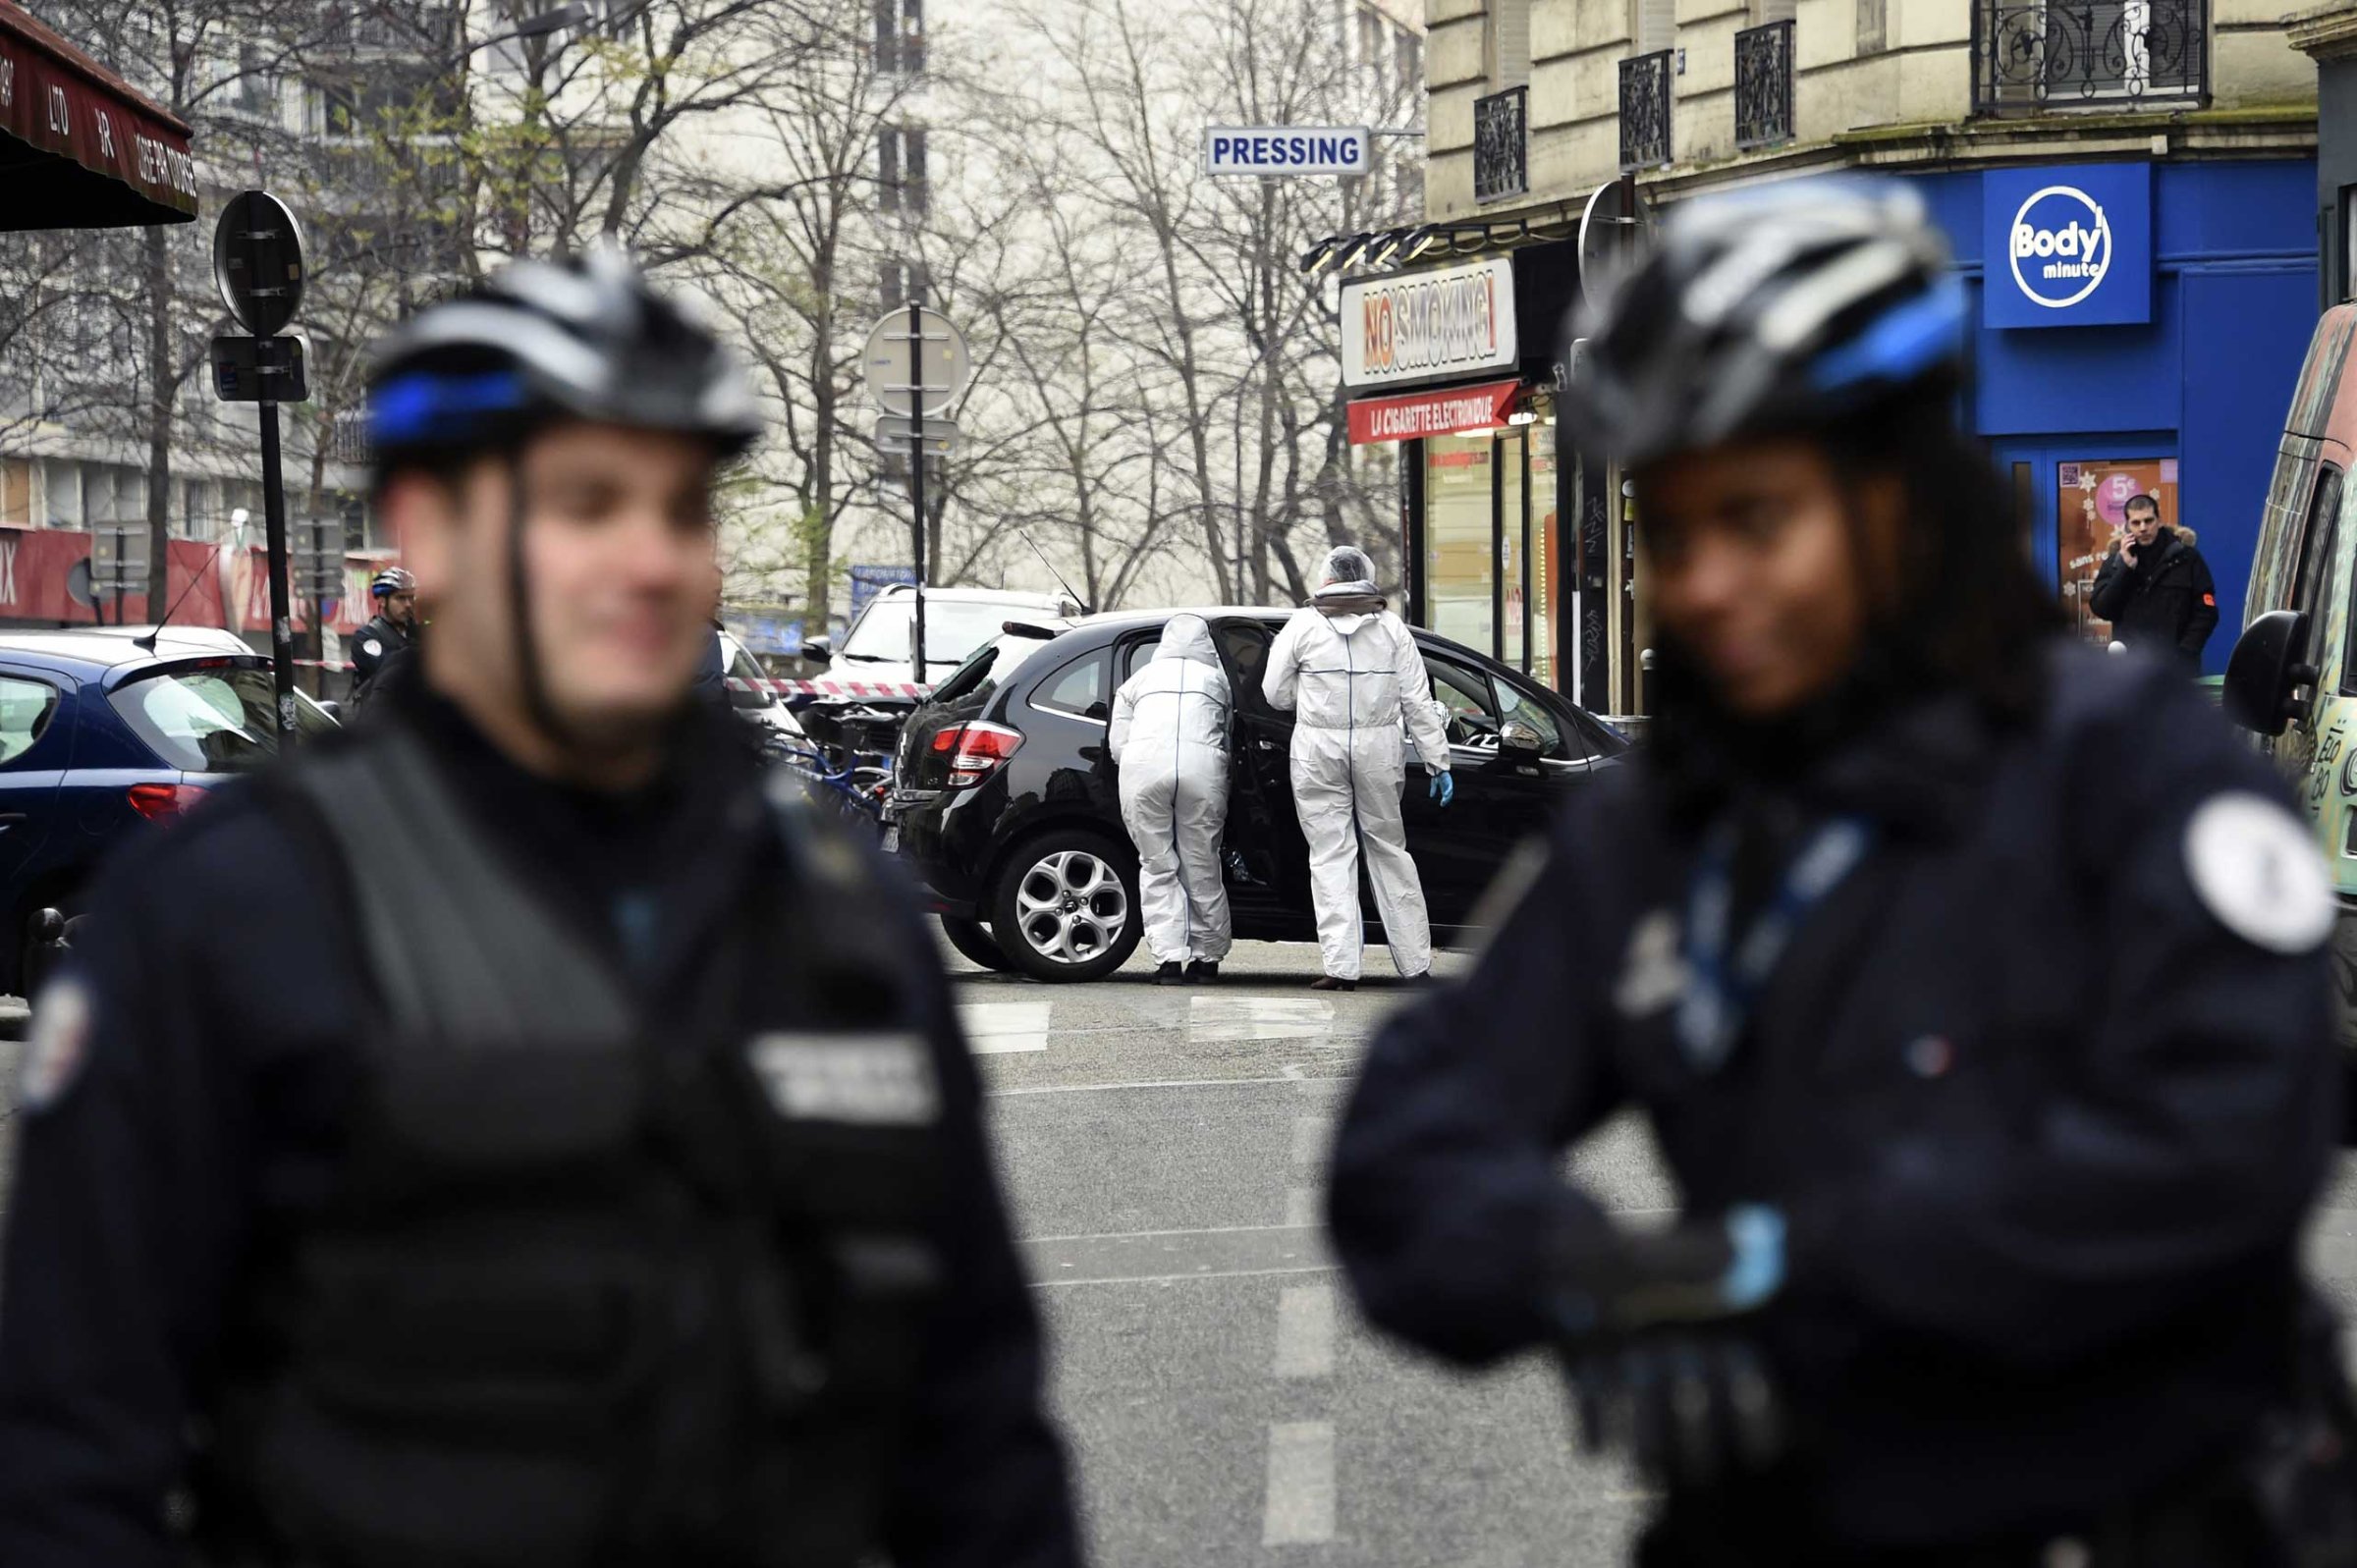 French police officers and forensic experts examine the car used by armed gunmen who stormed the Paris offices of satirical newspaper Charlie Hebdo on Jan. 7, 2015 in Paris.